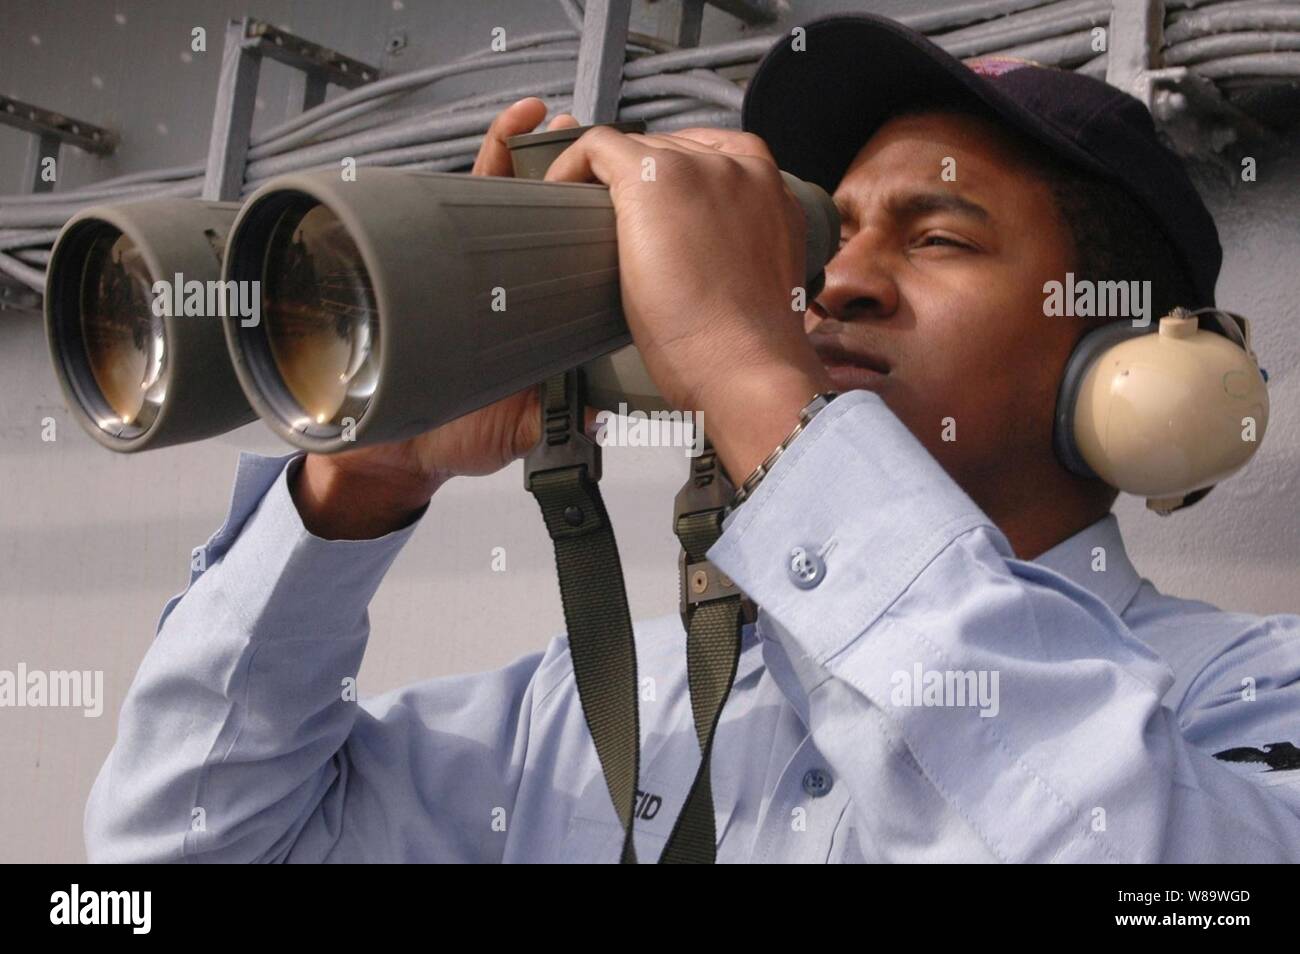 U.S. Navy Petty Officer 2nd Class Christopher Reid uses binoculars to look at commercial ships near the aircraft carrier USS Kitty Hawk's (CV 63) as the ship operates in the Pacific Ocean on March 3, 2008.  Reid is a Navy Intelligence Specialist onboard the carrier. Stock Photo